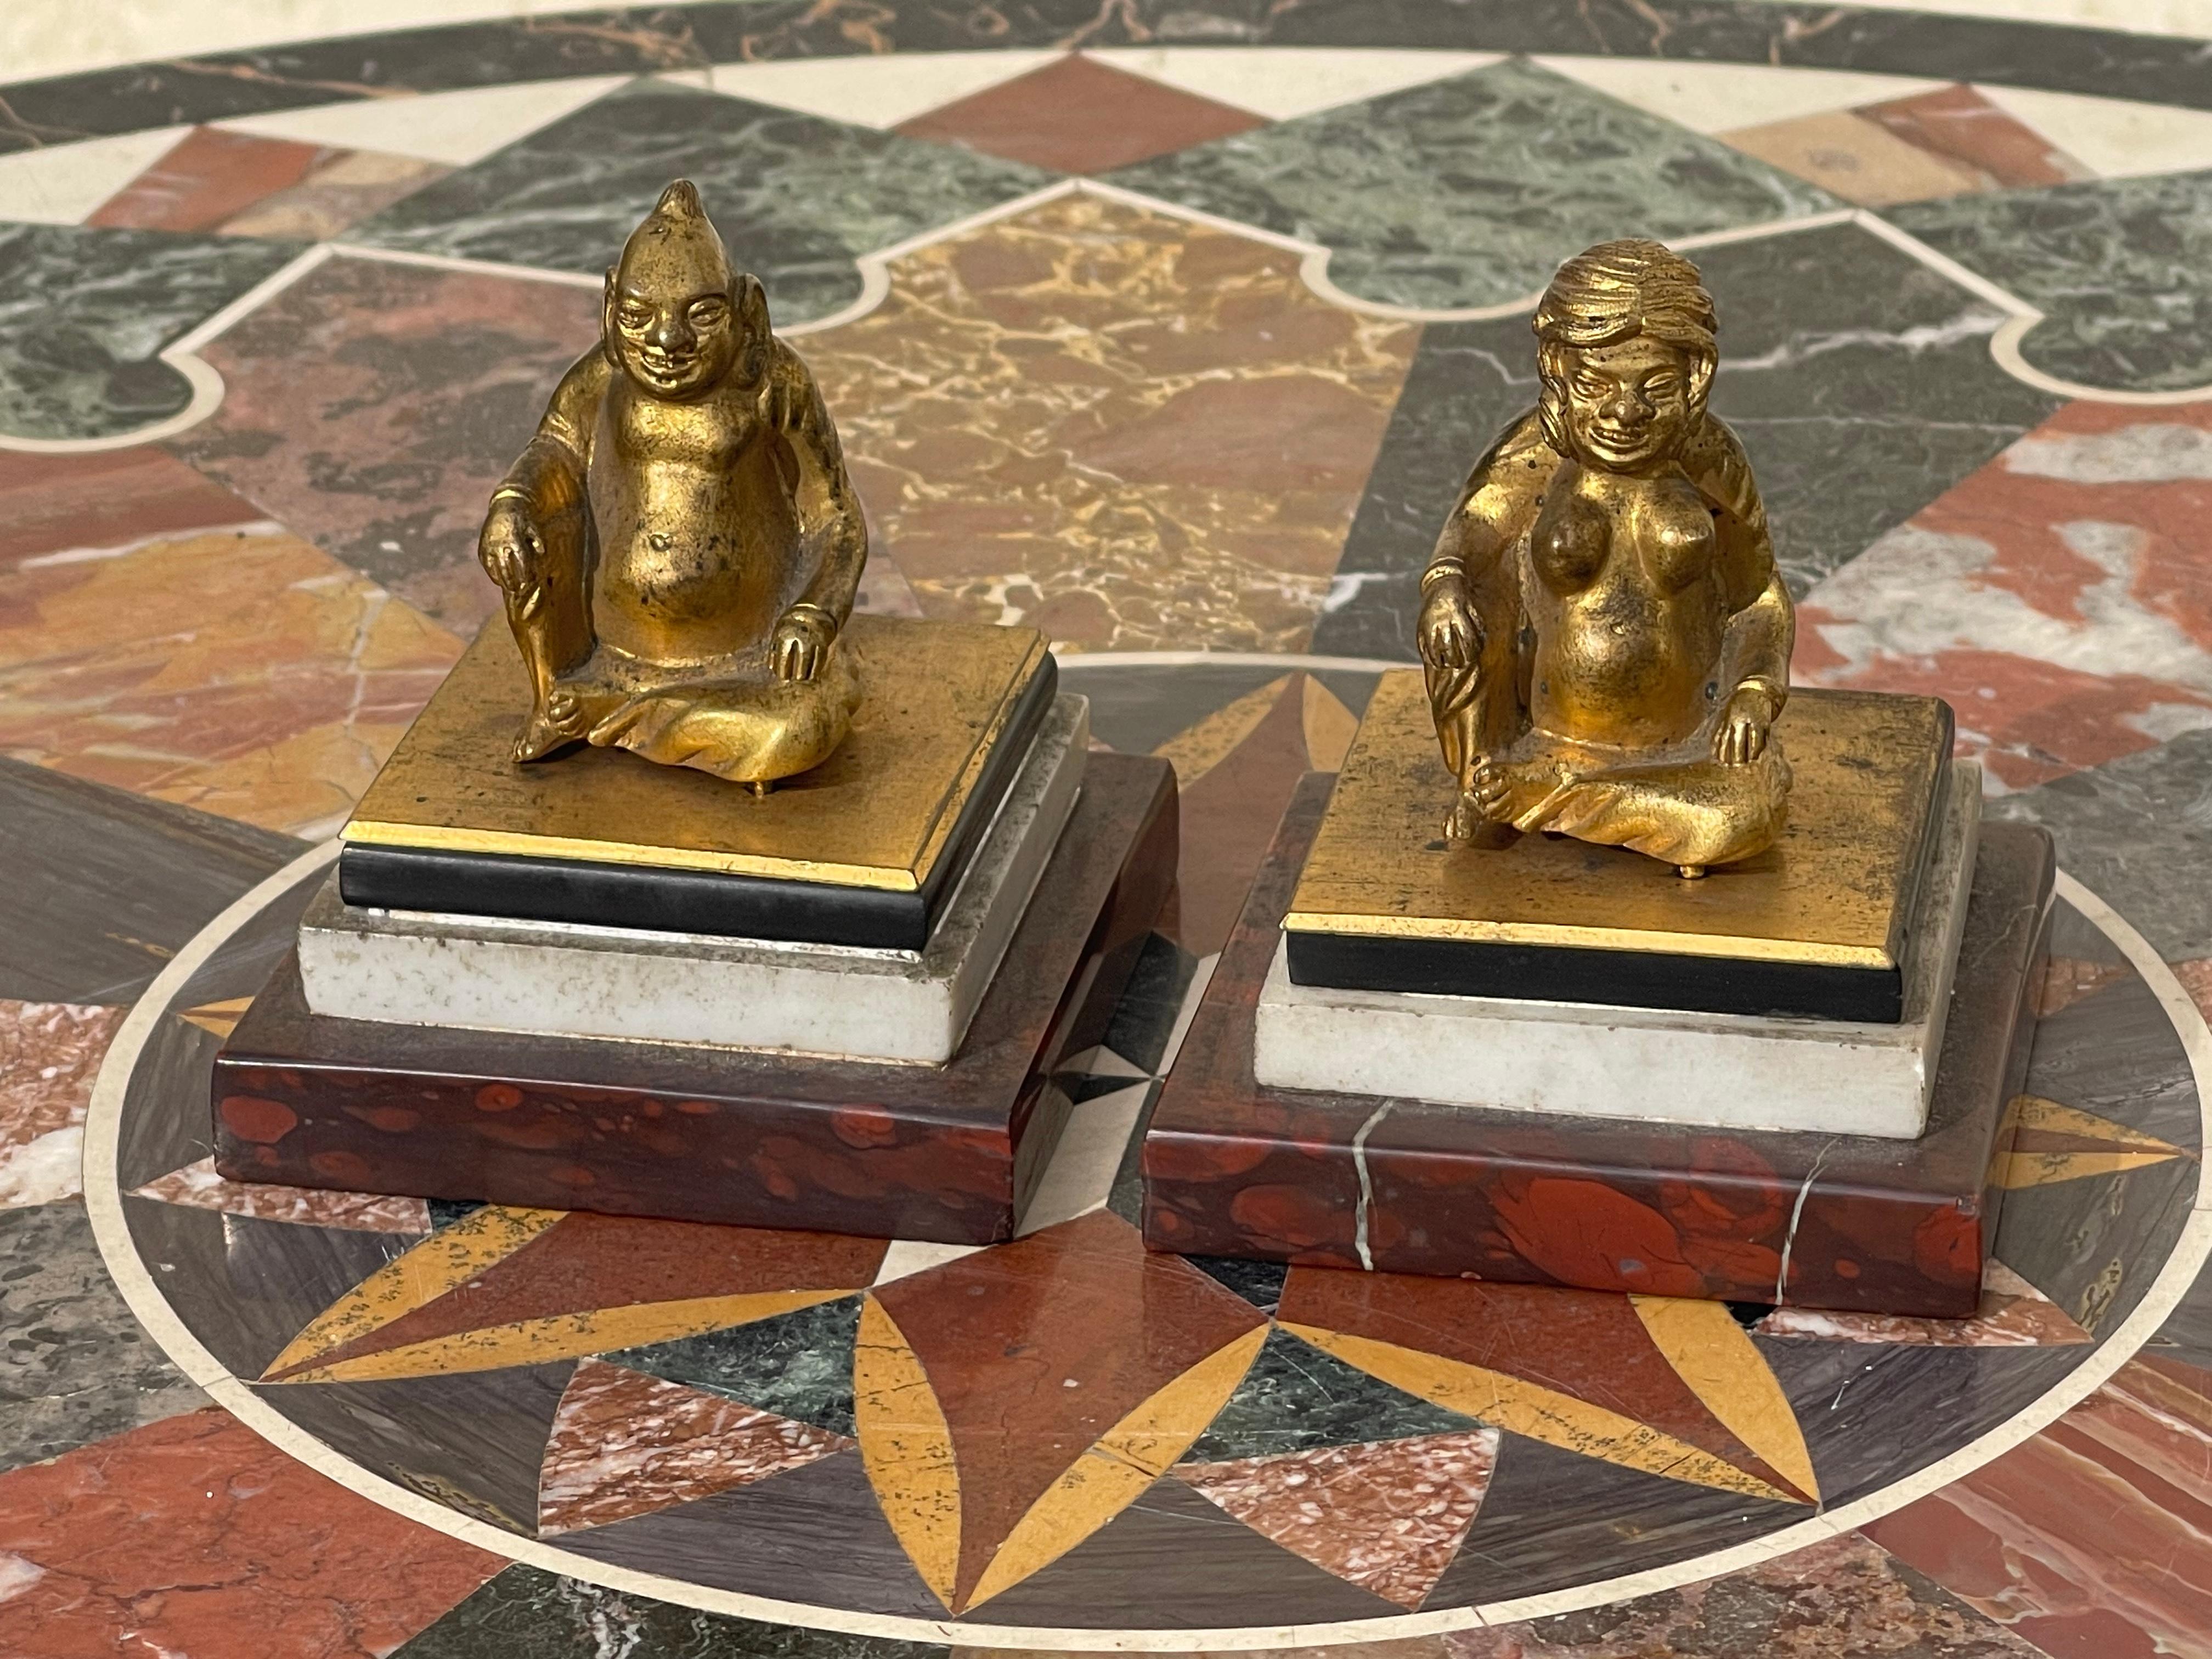 Pair of erotic bronzes representing a Chinese couple resting on a base composed of three different marbles: cherry red, carrara white and finally black. The characters tilt at the back and reveal their posteriors. They are in good